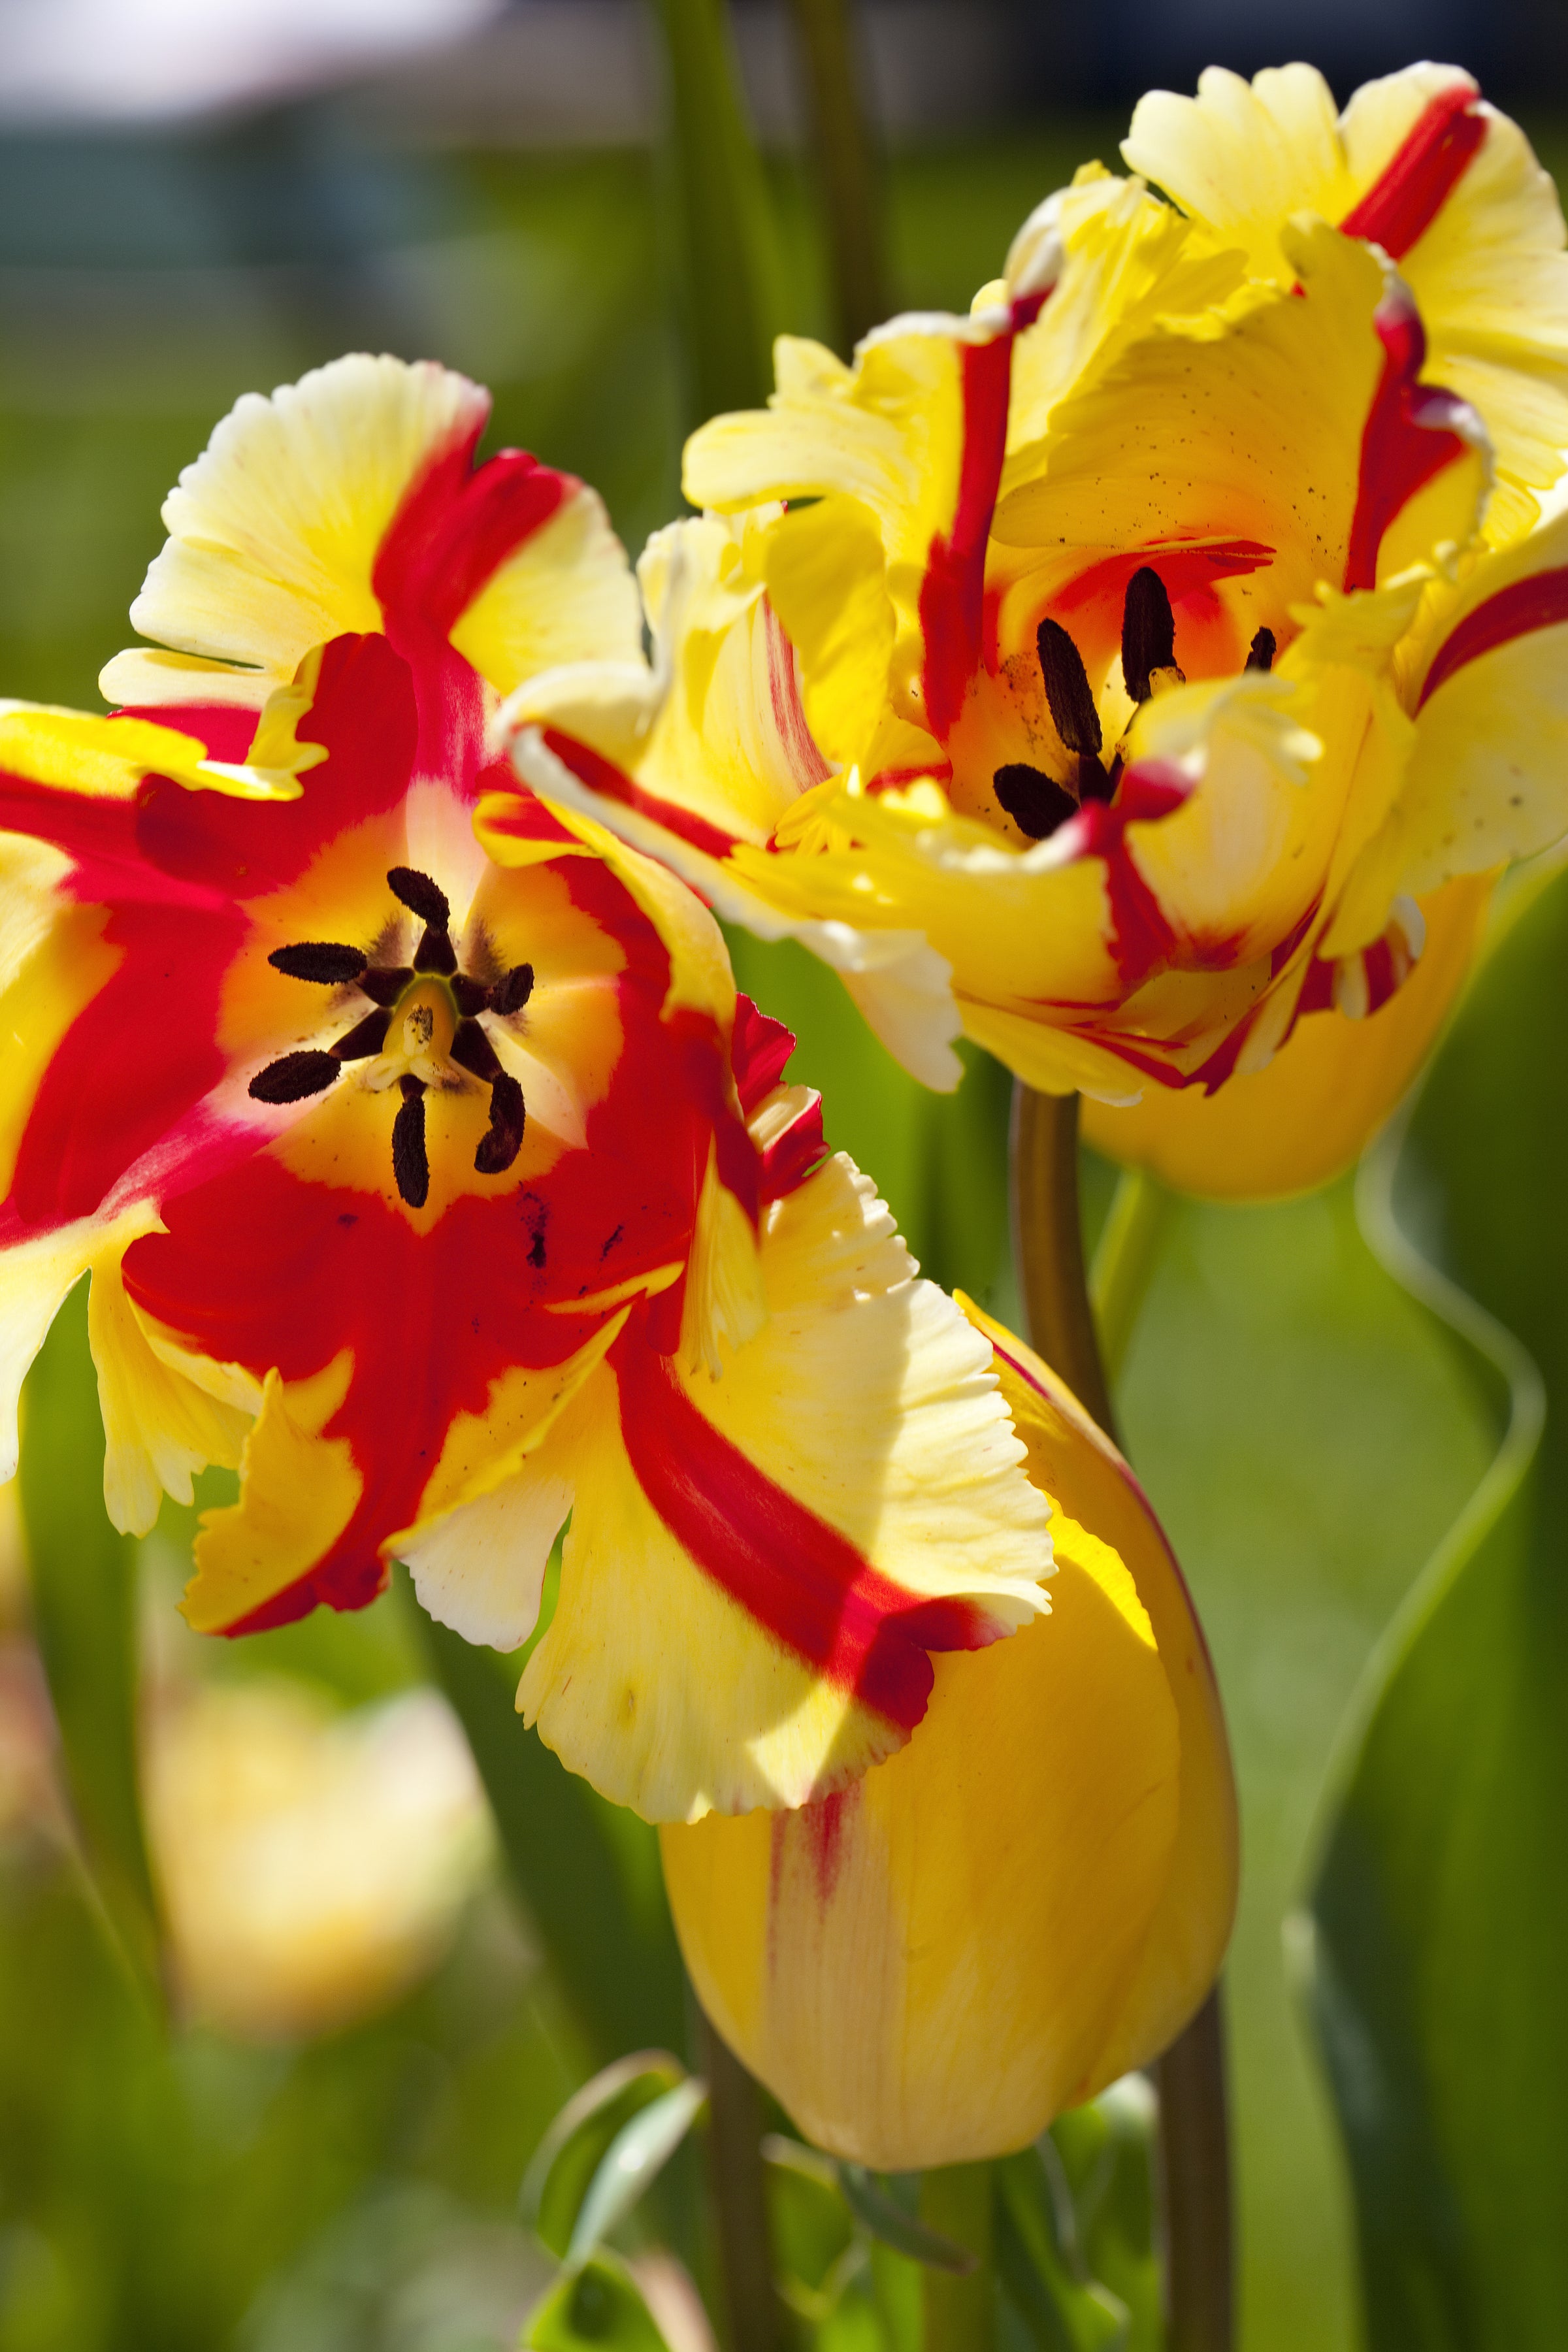 Vibrant red and yellow Parrot tulip named Texas Flame in bloom.